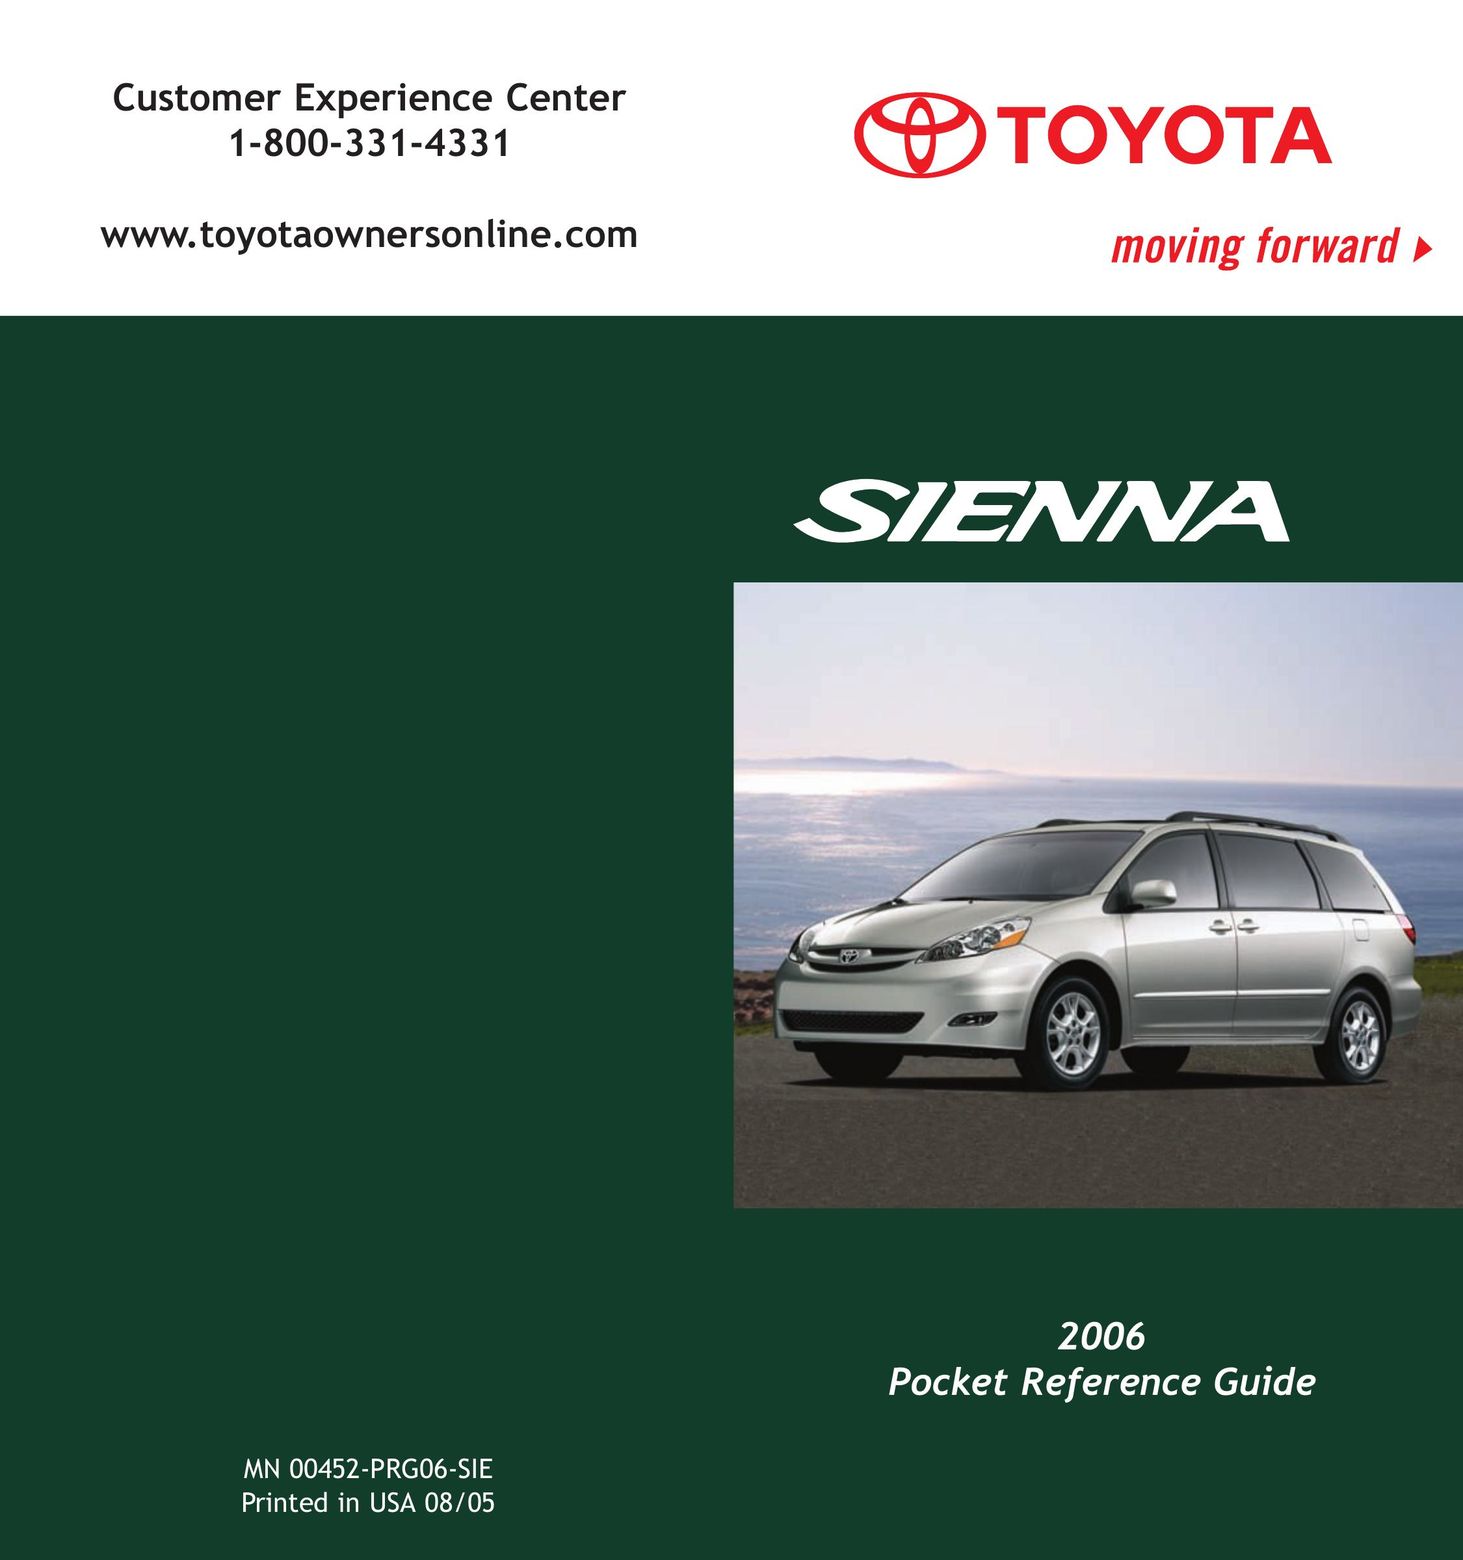 Toyota MN 00452-PRG06-SIE Network Card User Manual